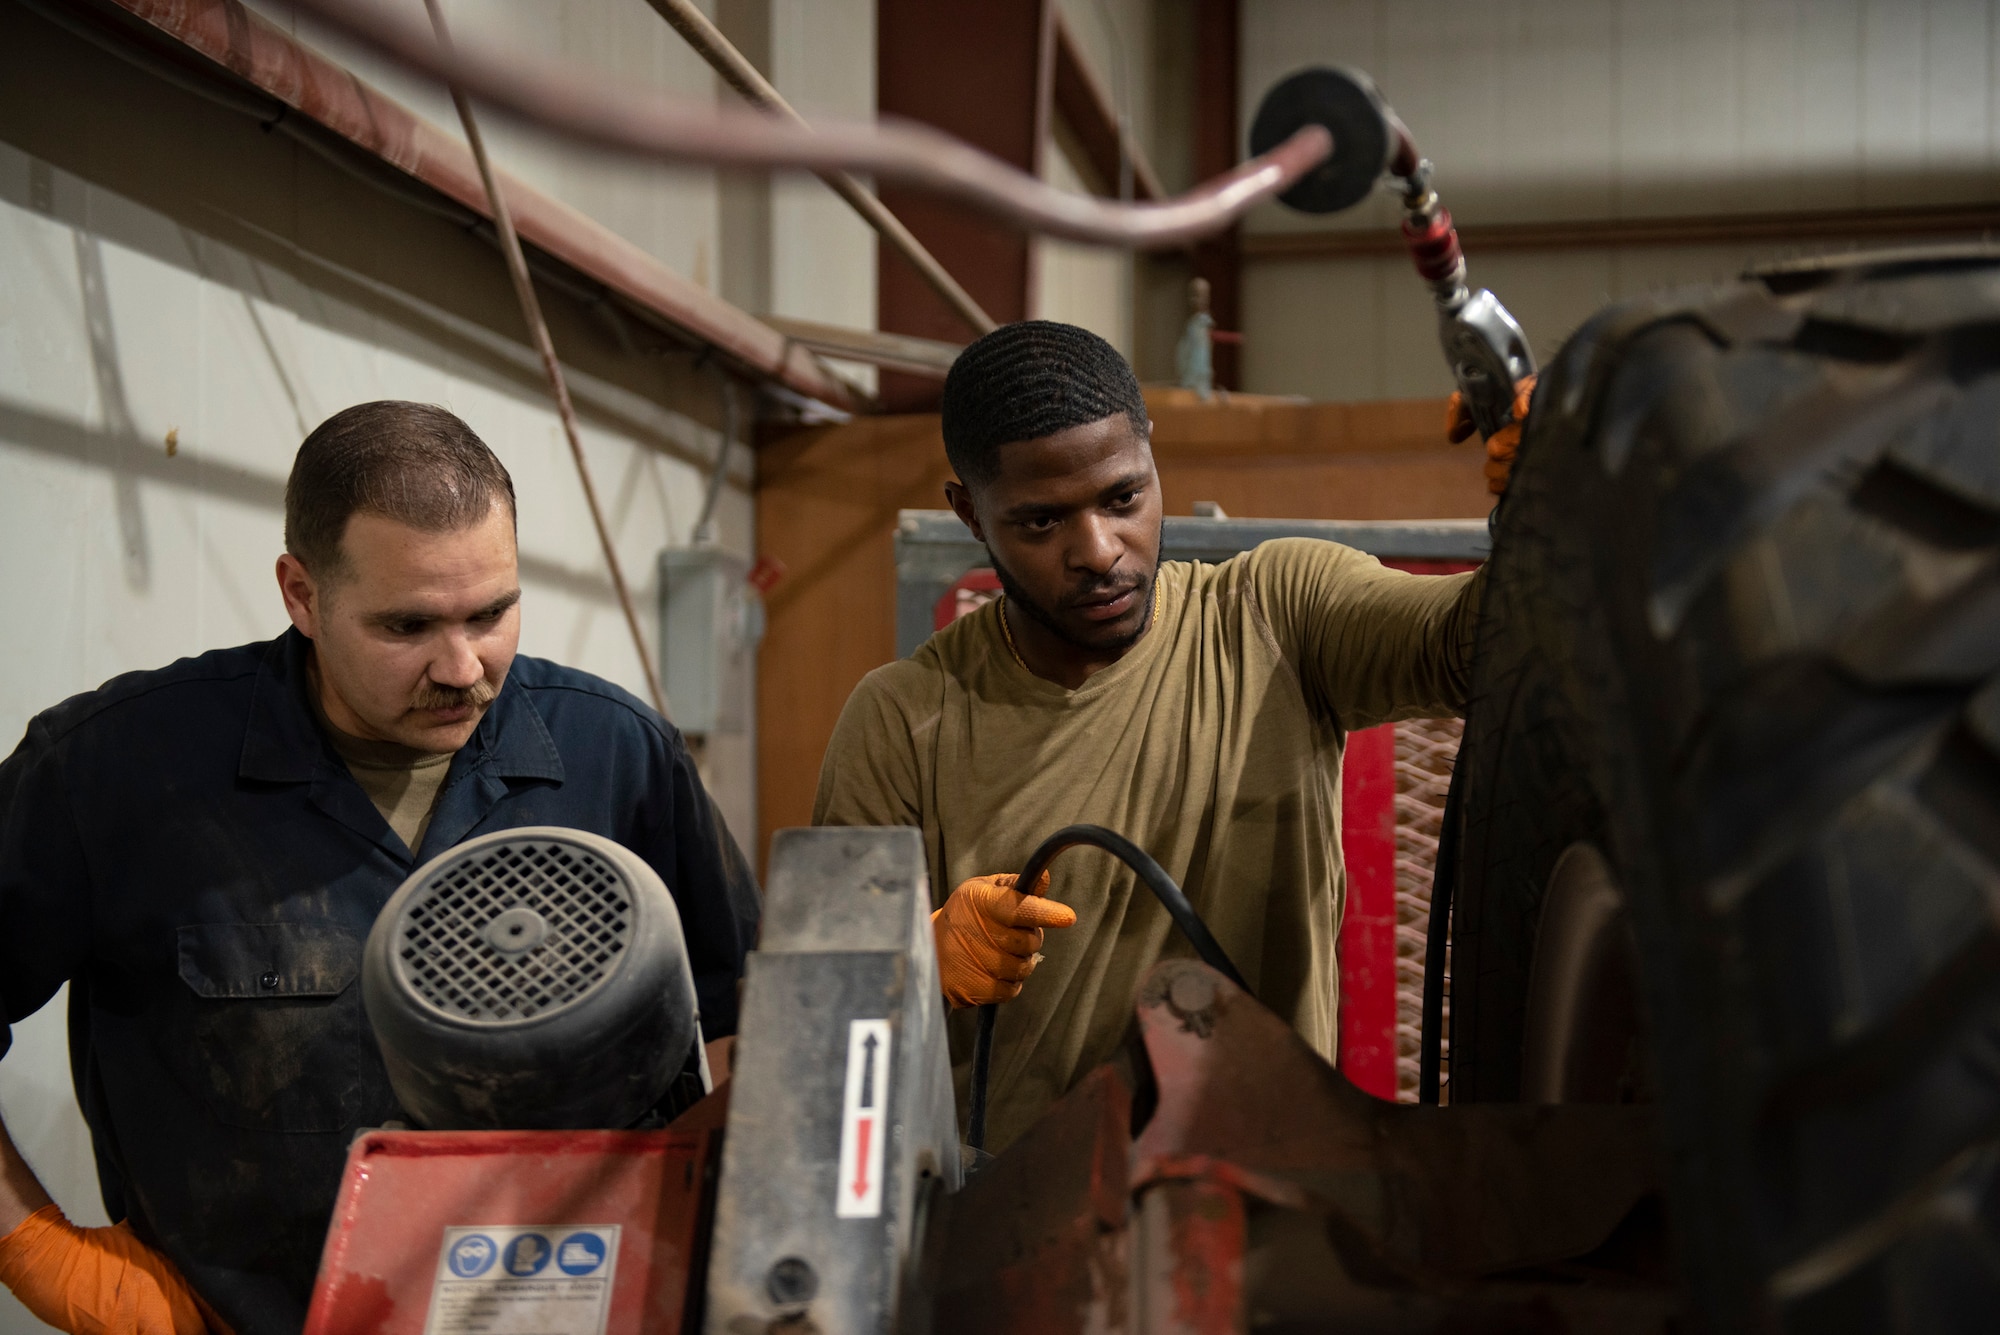 U.S. Air Force Staff Sgt. Douglas Johnson, (left) a vehicle maintainer assigned to the 386th Expeditionary Logistics Readiness Squadron, assists U.S. Air Force Senior Airman Dalfred Sonnier (right) a vehicle maintainer assigned to the 386th Expeditionary Logistics Readiness Squadron, fill a tire with air at Ali Al Salem Air Base, Kuwait, July 8, 2021.